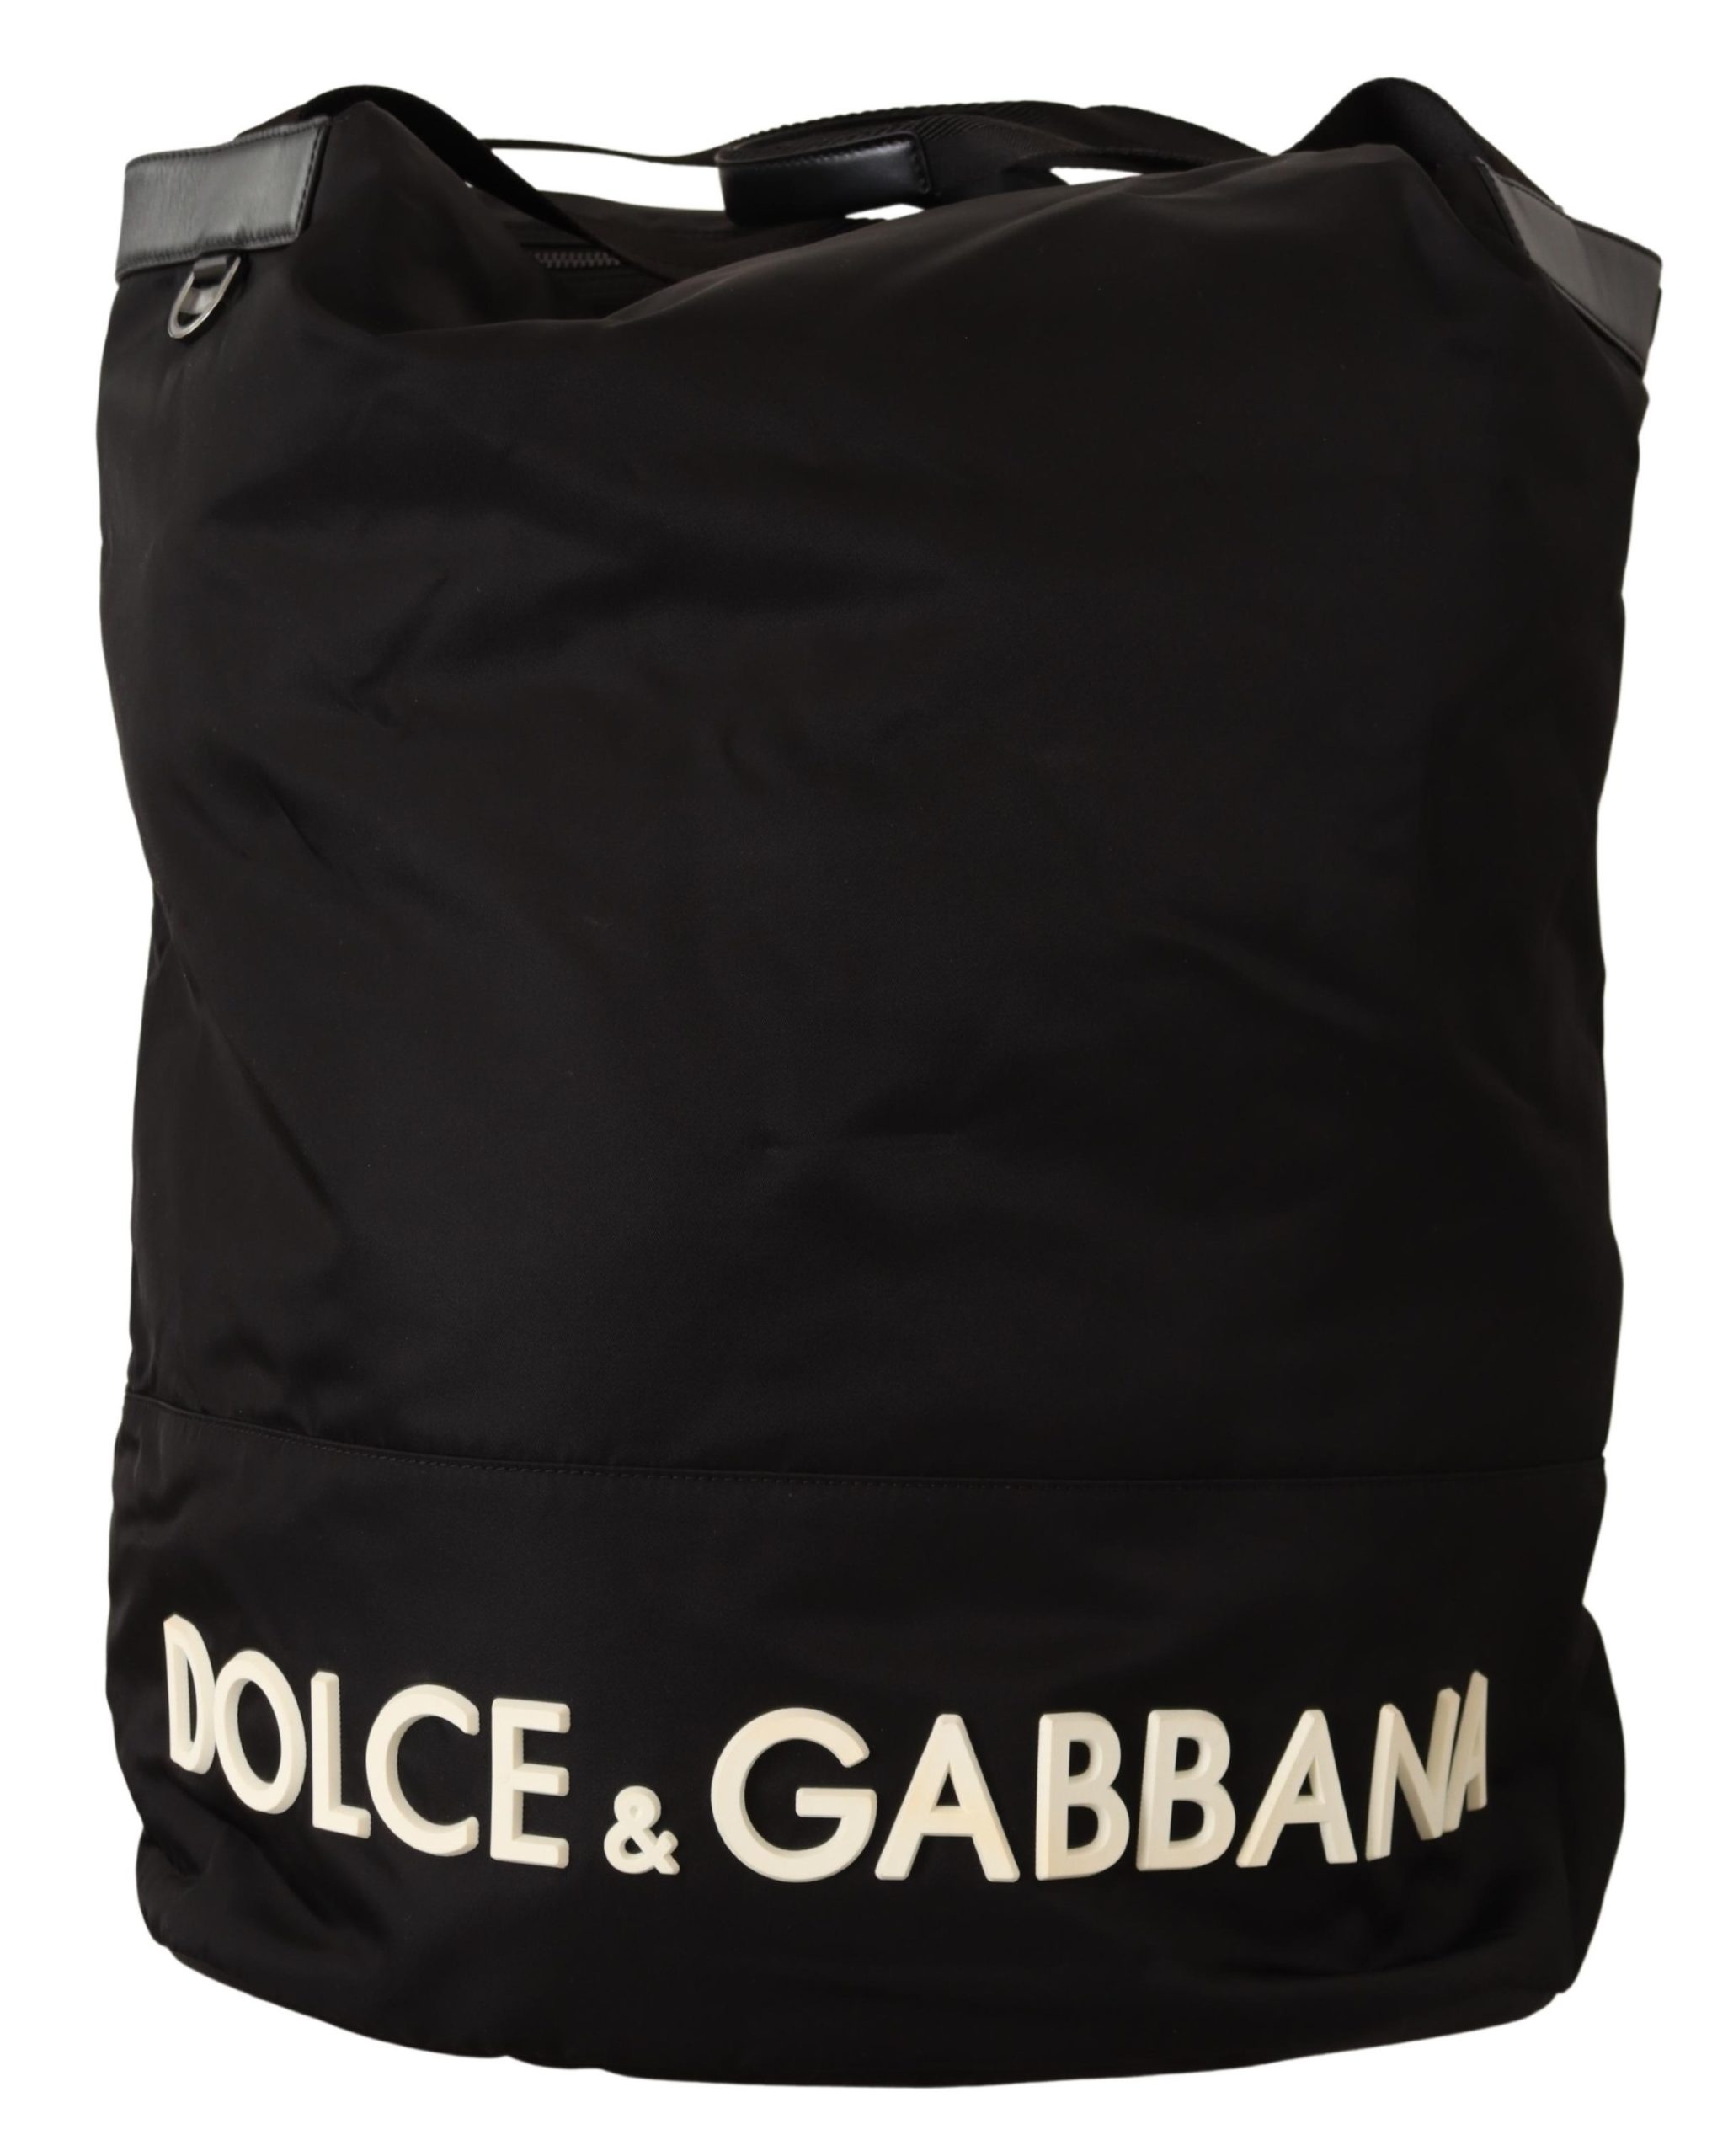 Save 7% Dolce & Gabbana Tote Leather Bag in Black for Men Mens Bags Tote bags 